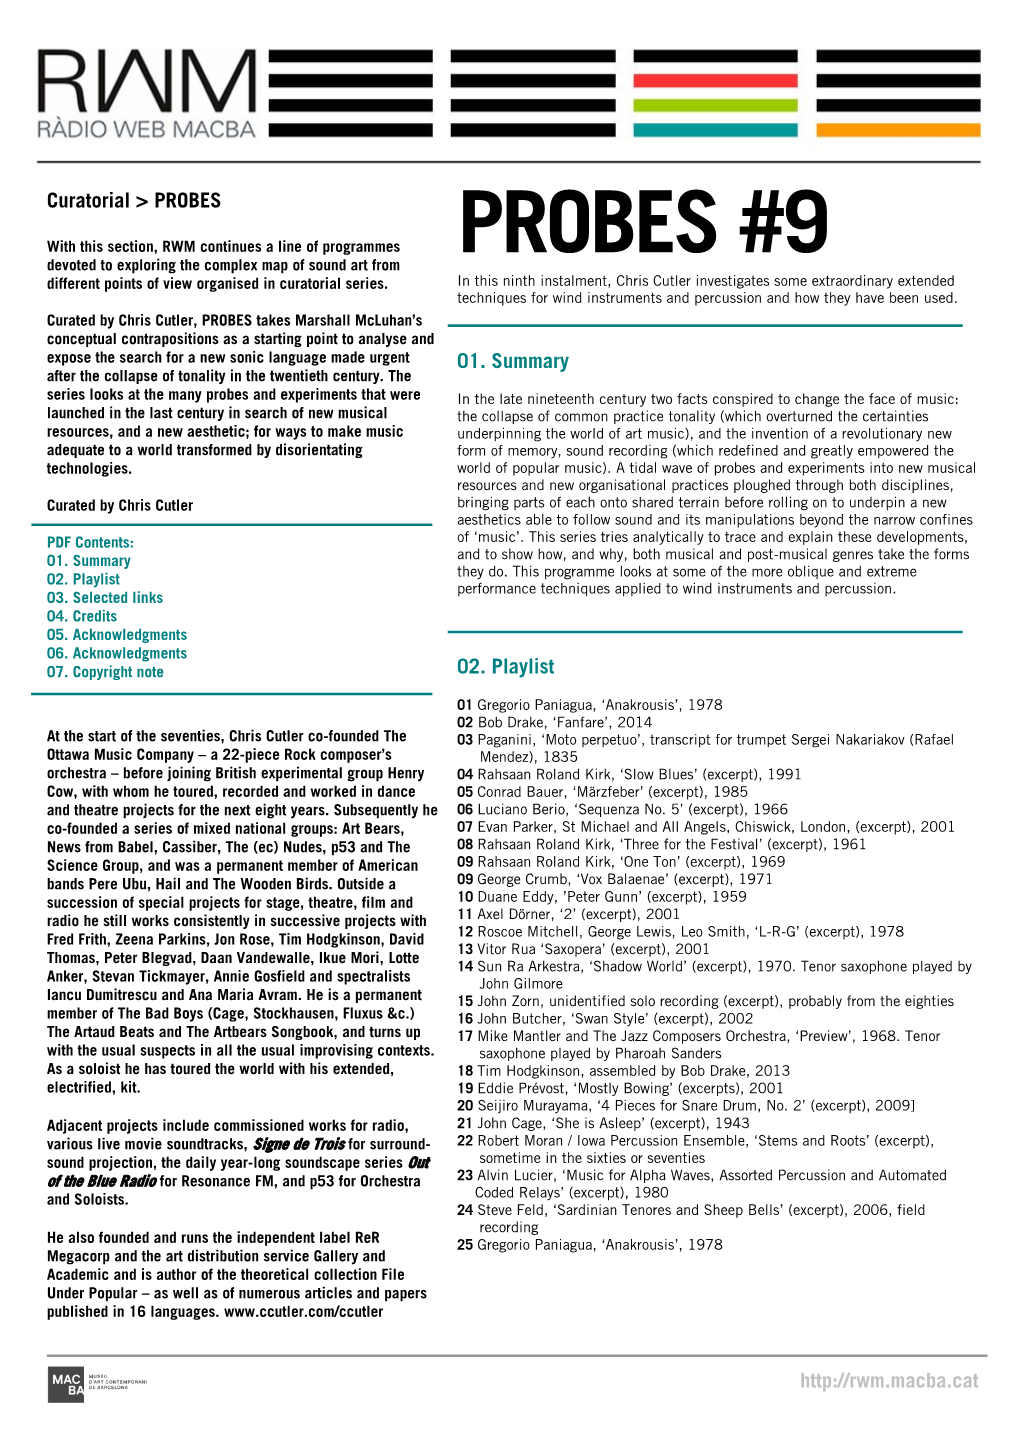 PROBES #9 Devoted to Exploring the Complex Map of Sound Art from Different Points of View Organised in Curatorial Series